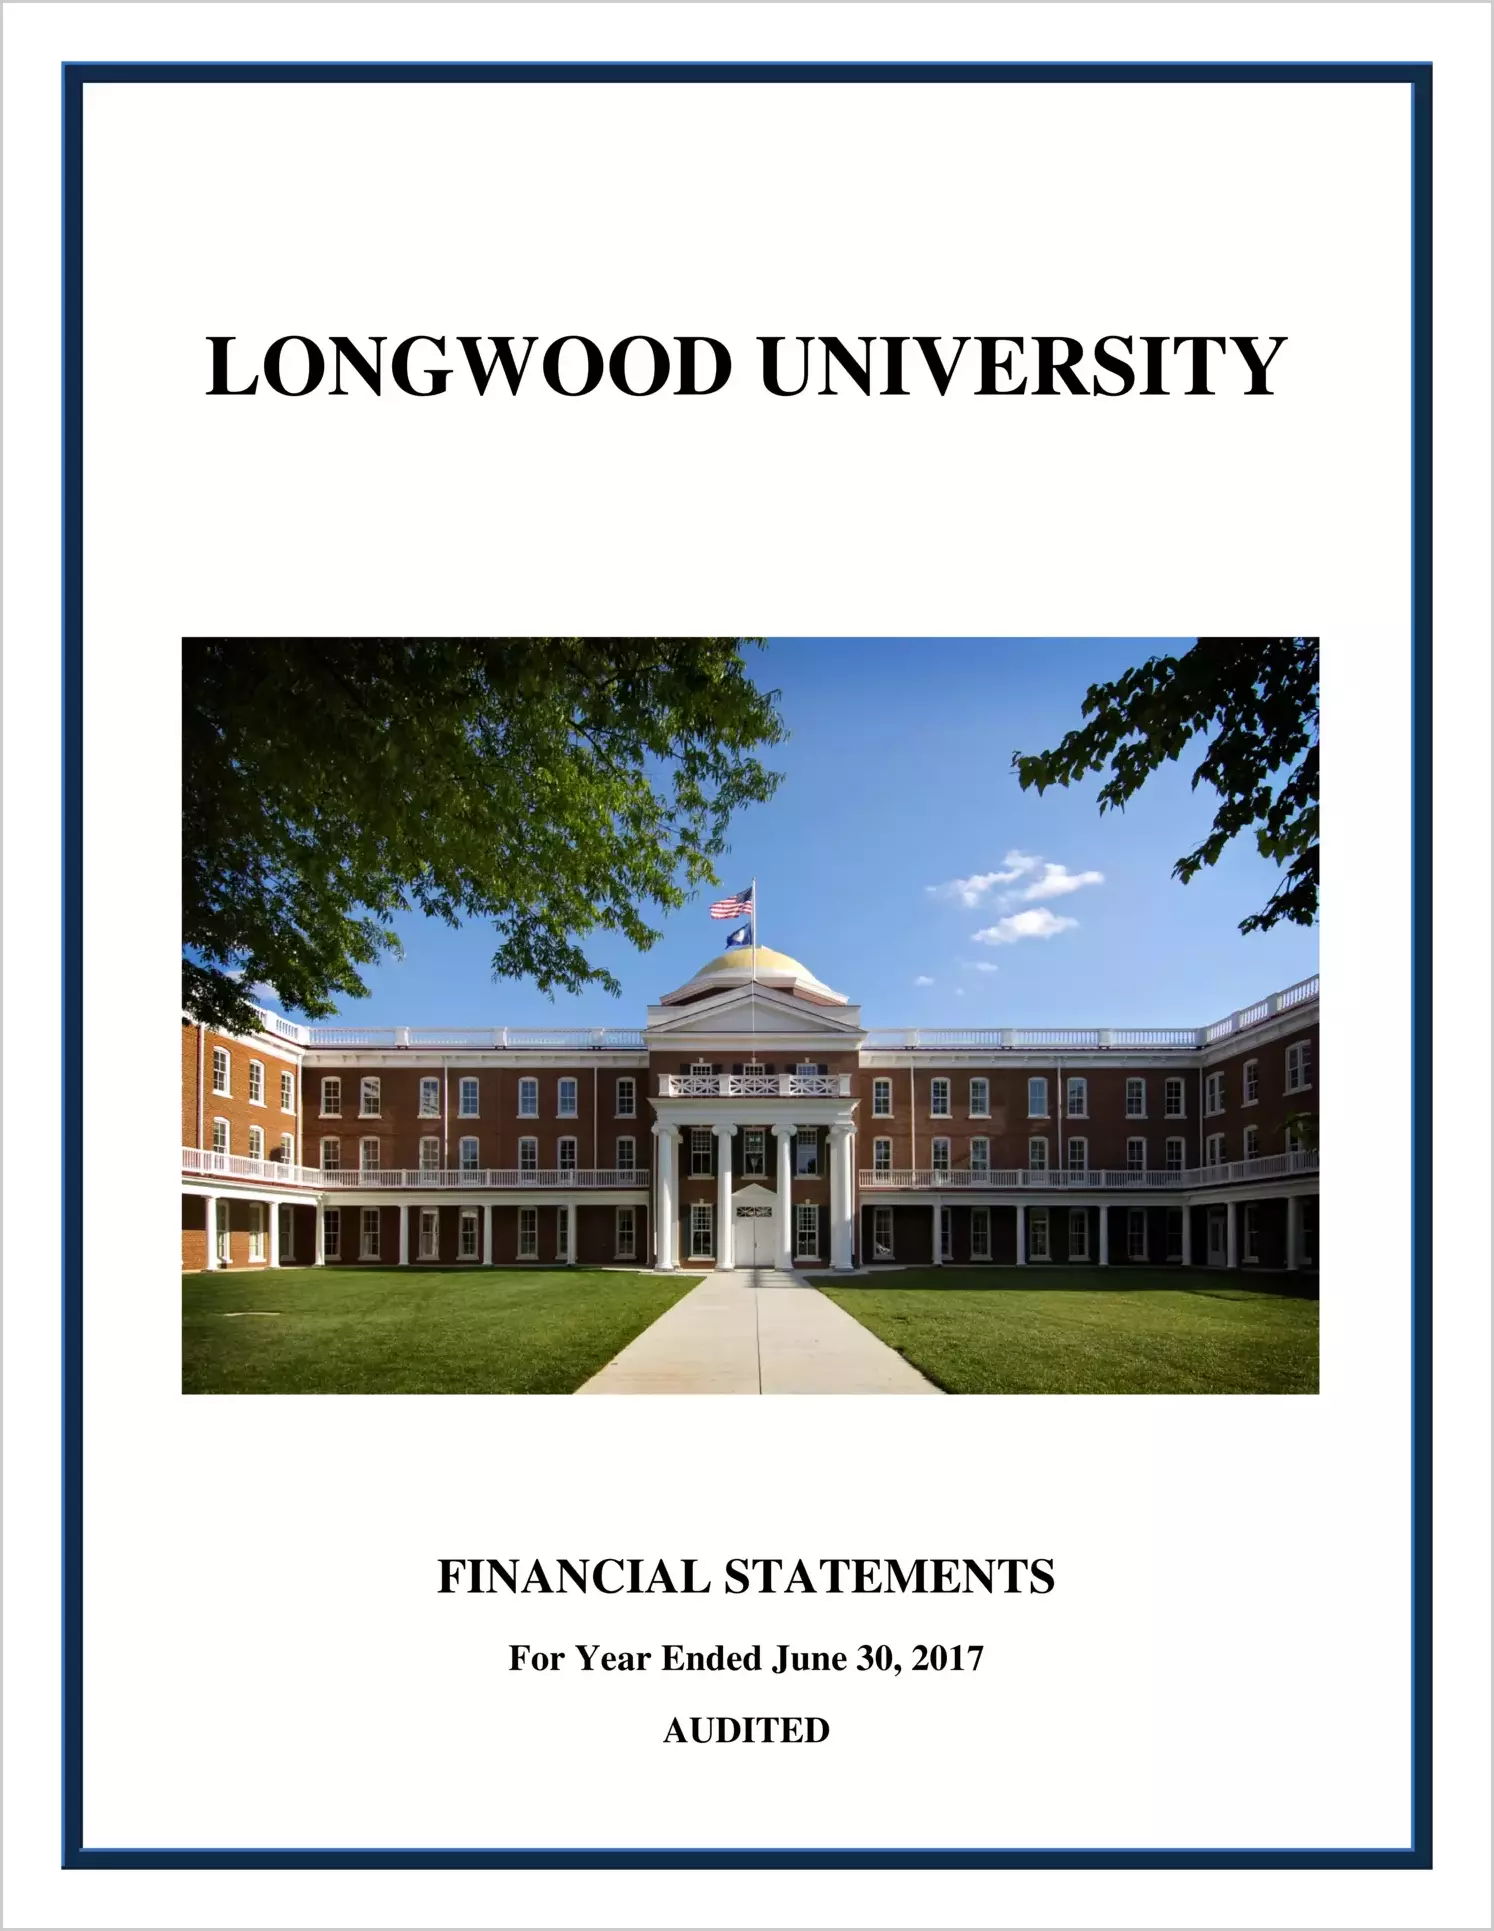 Longwood University Financial Statements for the year ended June 30, 2017